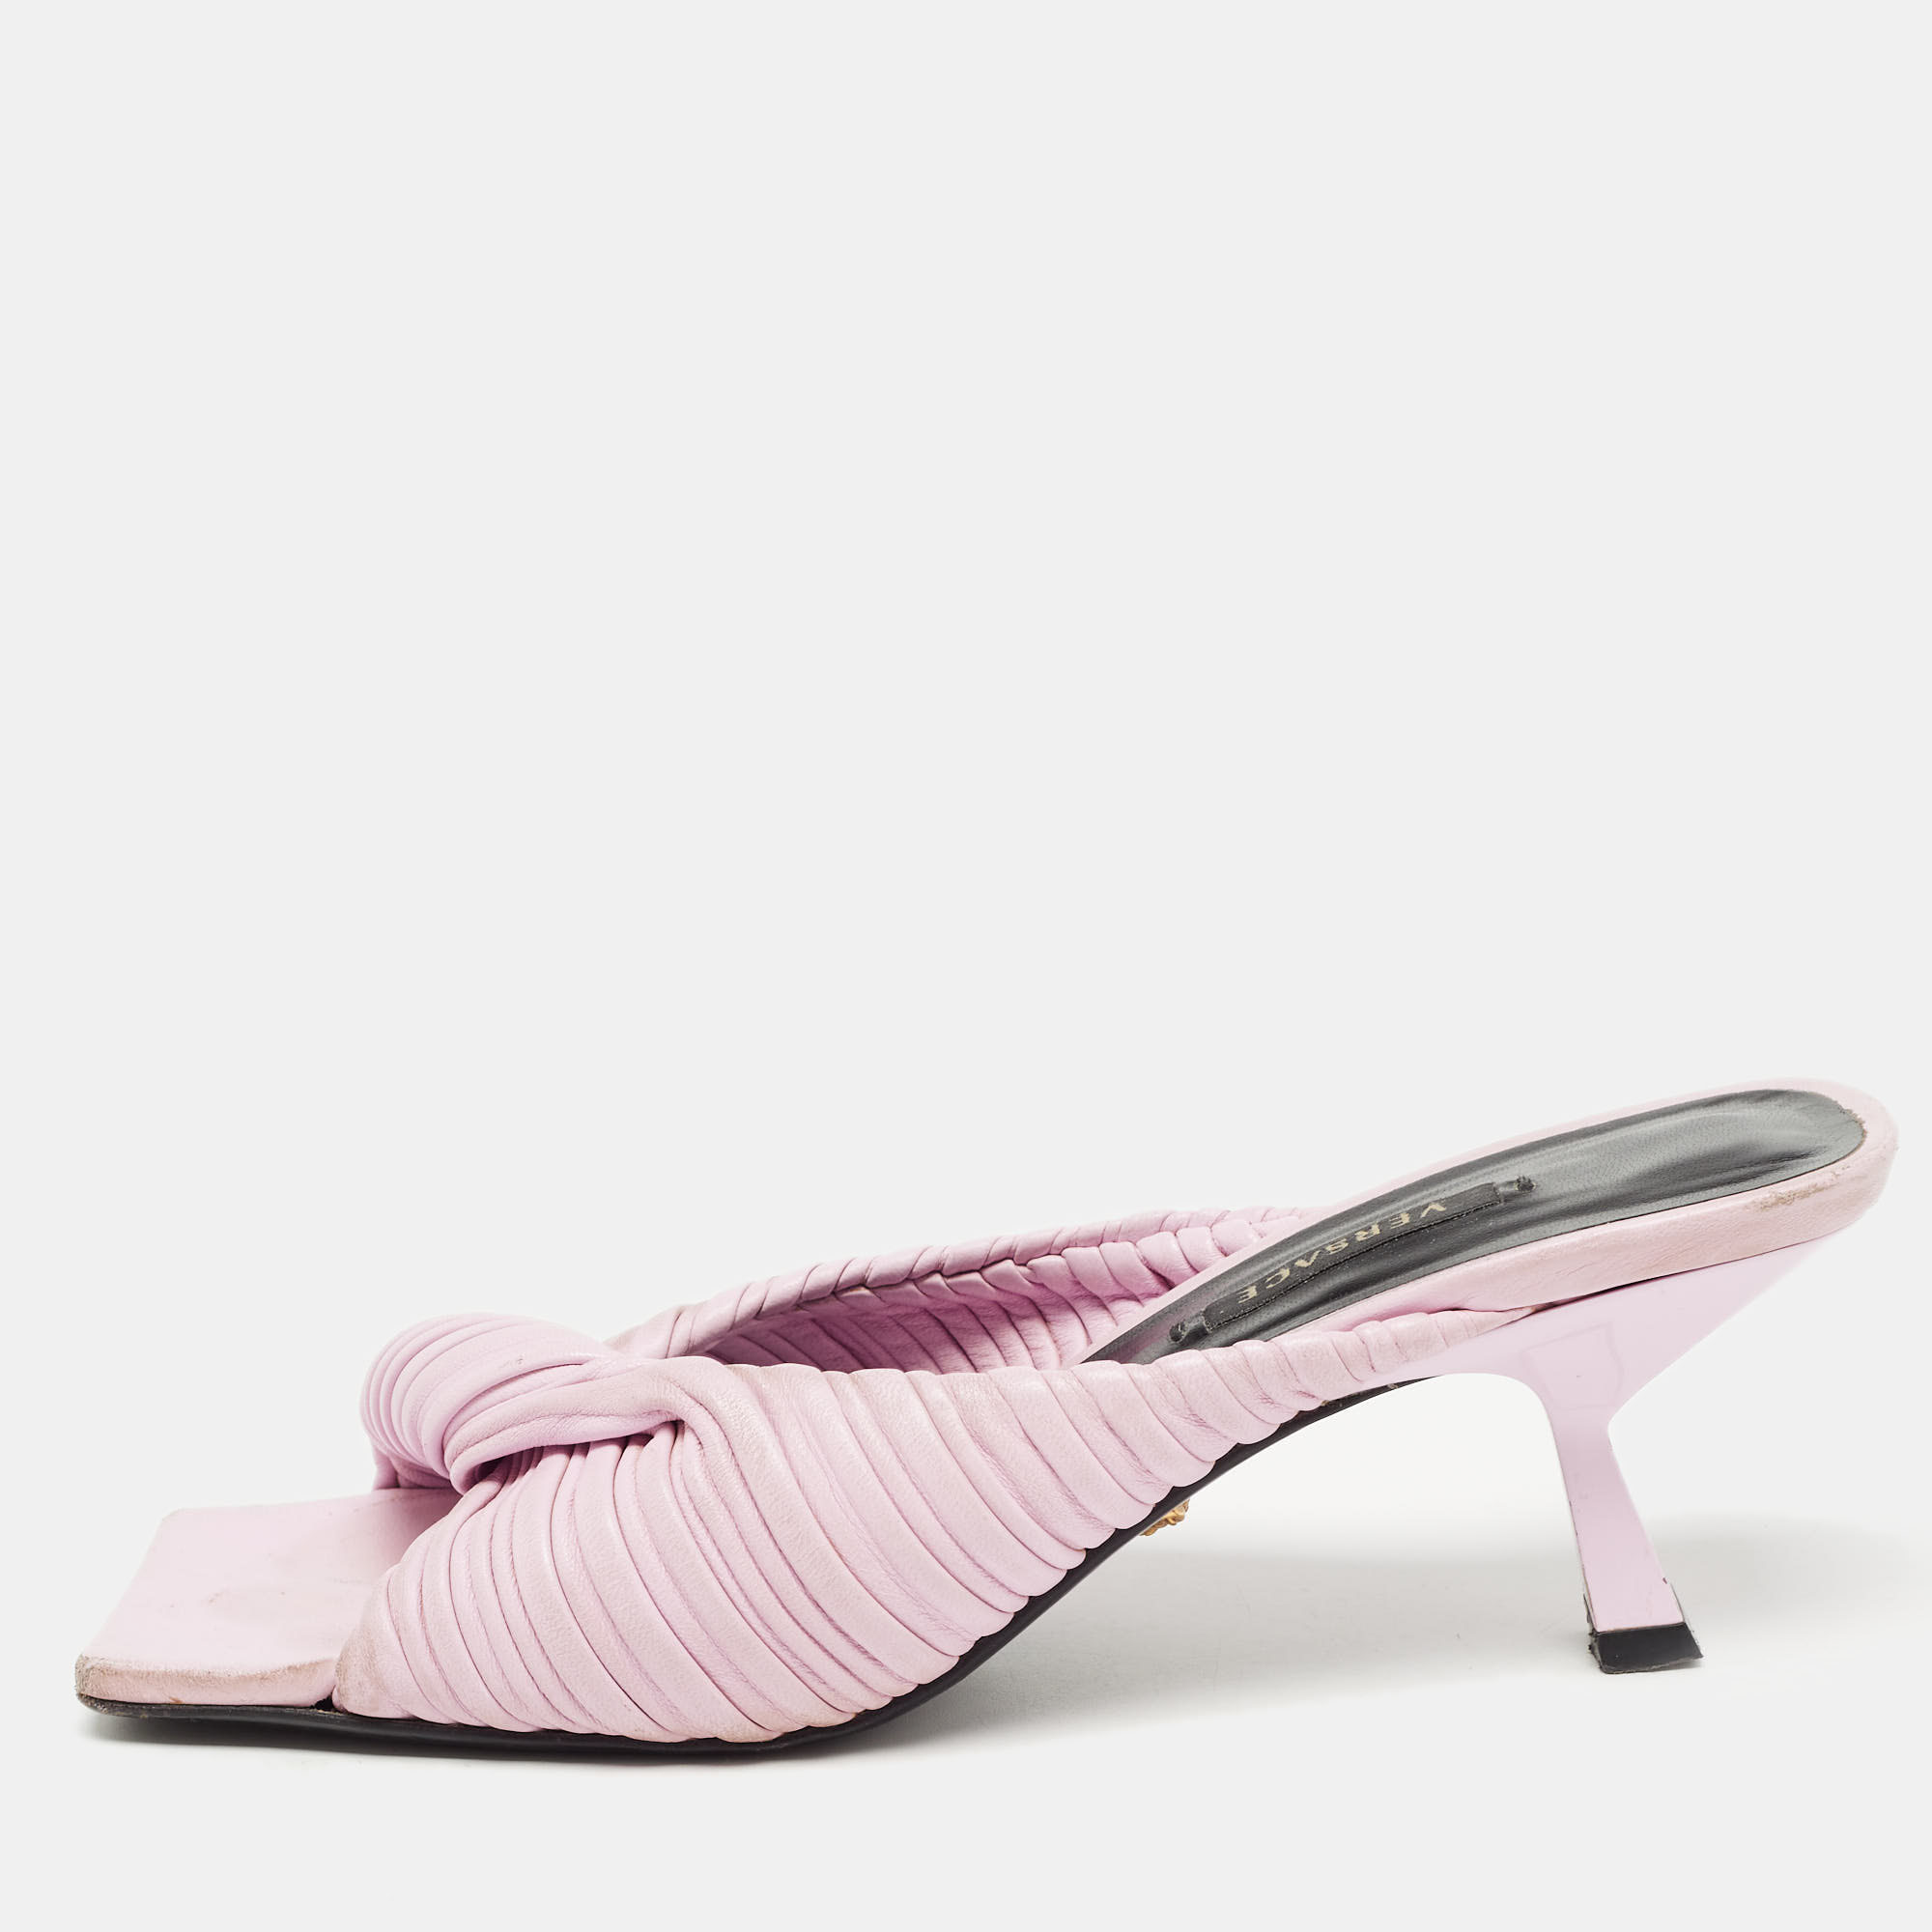 Versace pink pleated leather plisse slide sandals size 37